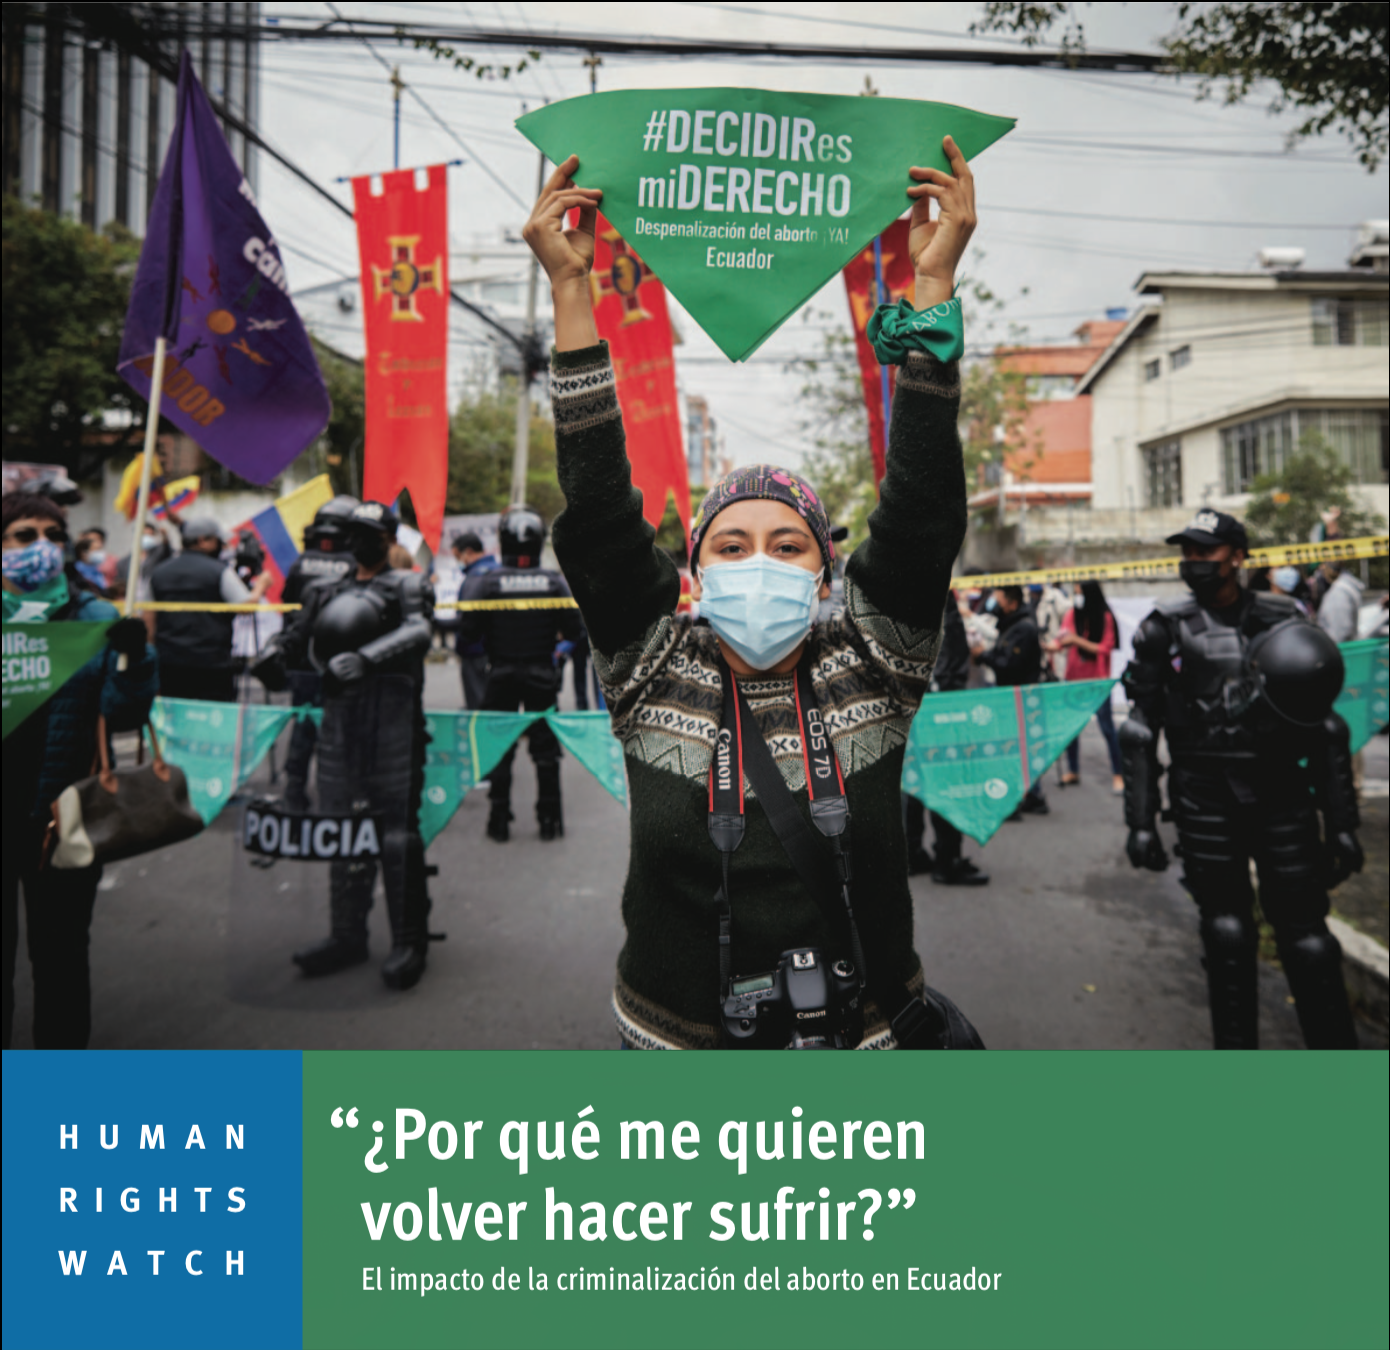 Thumbnail of For Human Rights Watch: "Decidir es mi derecho" at the presentation of the Human Rights Watch report on the impact of the criminalization of abortion in Ecuador